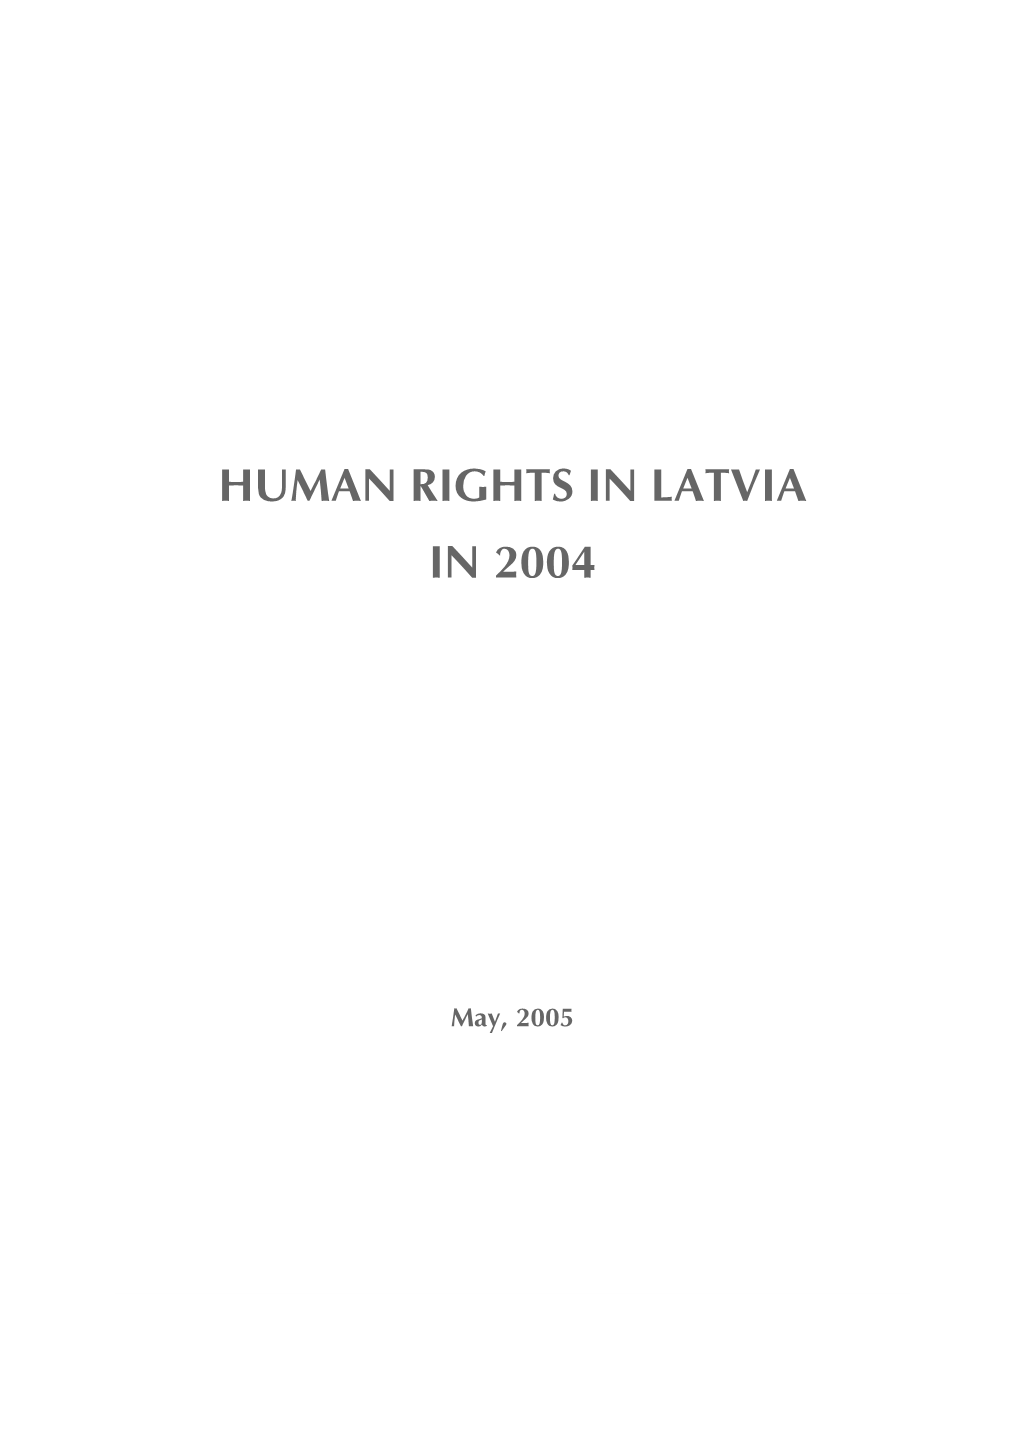 Human Rights in Latvia in 2004